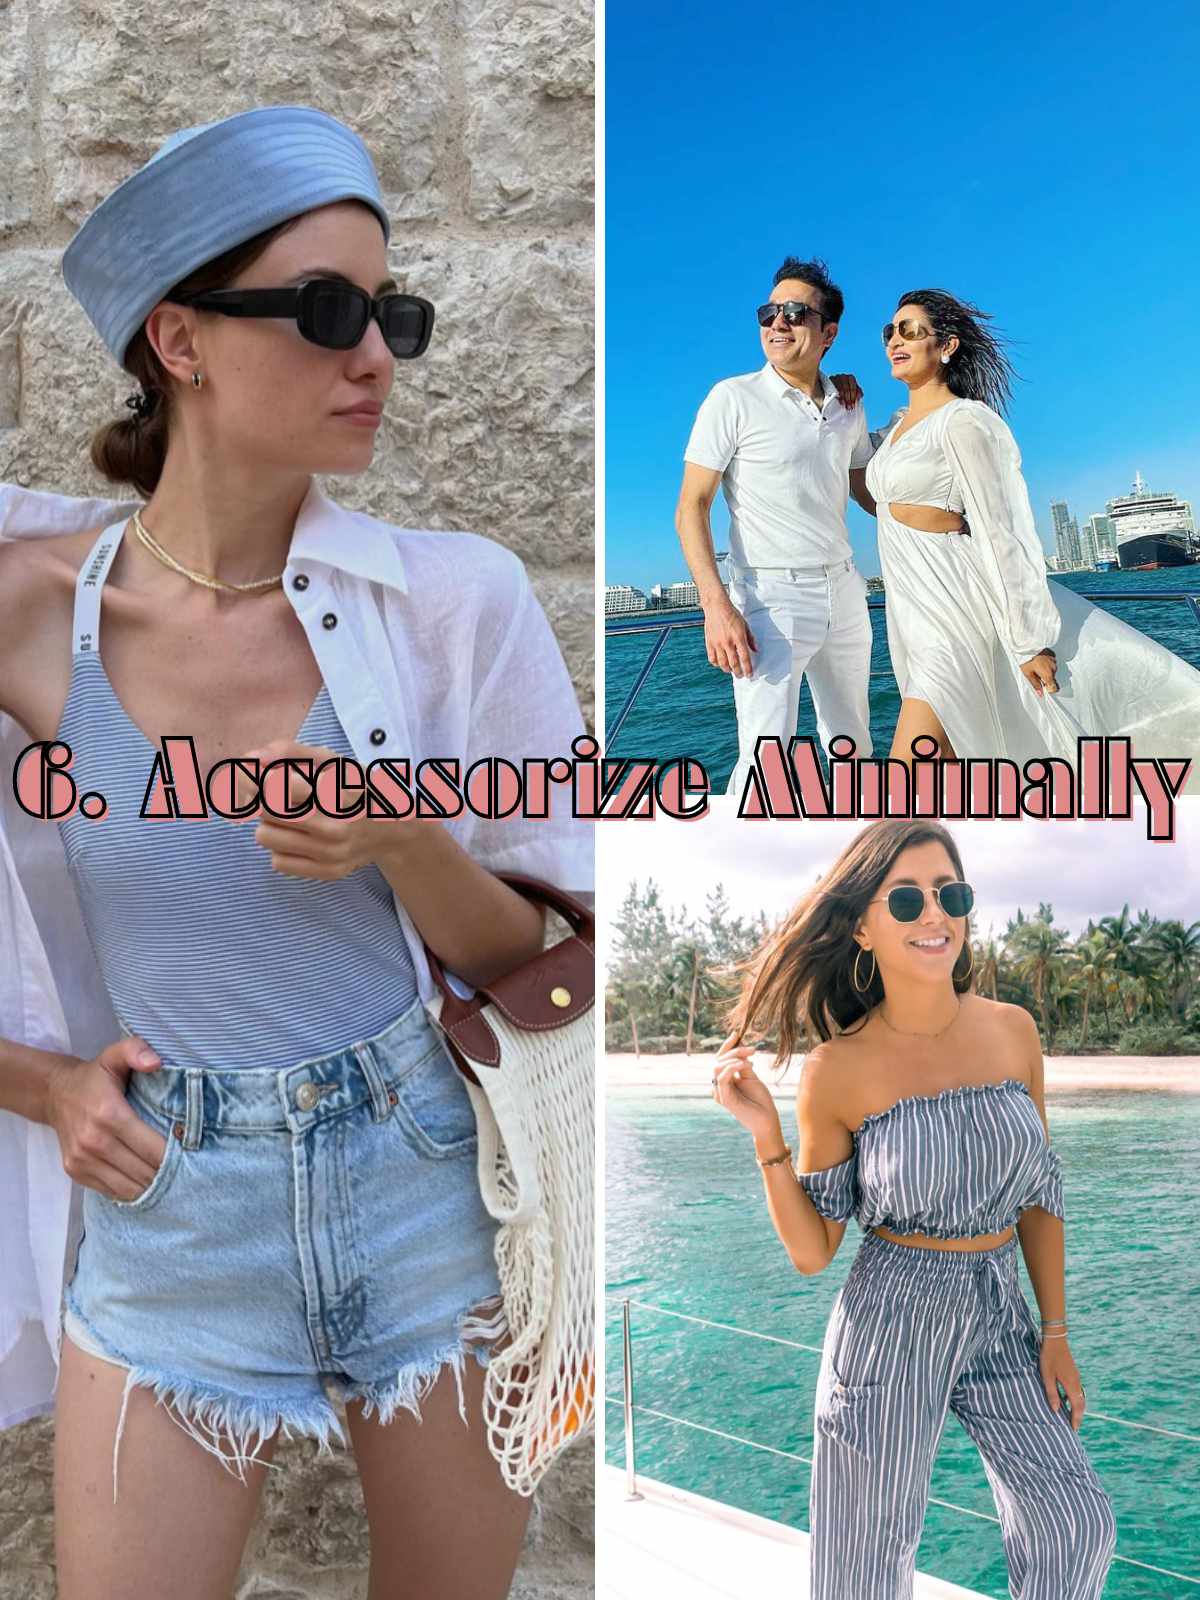 6. Accessorize minimally. 3 different outfits